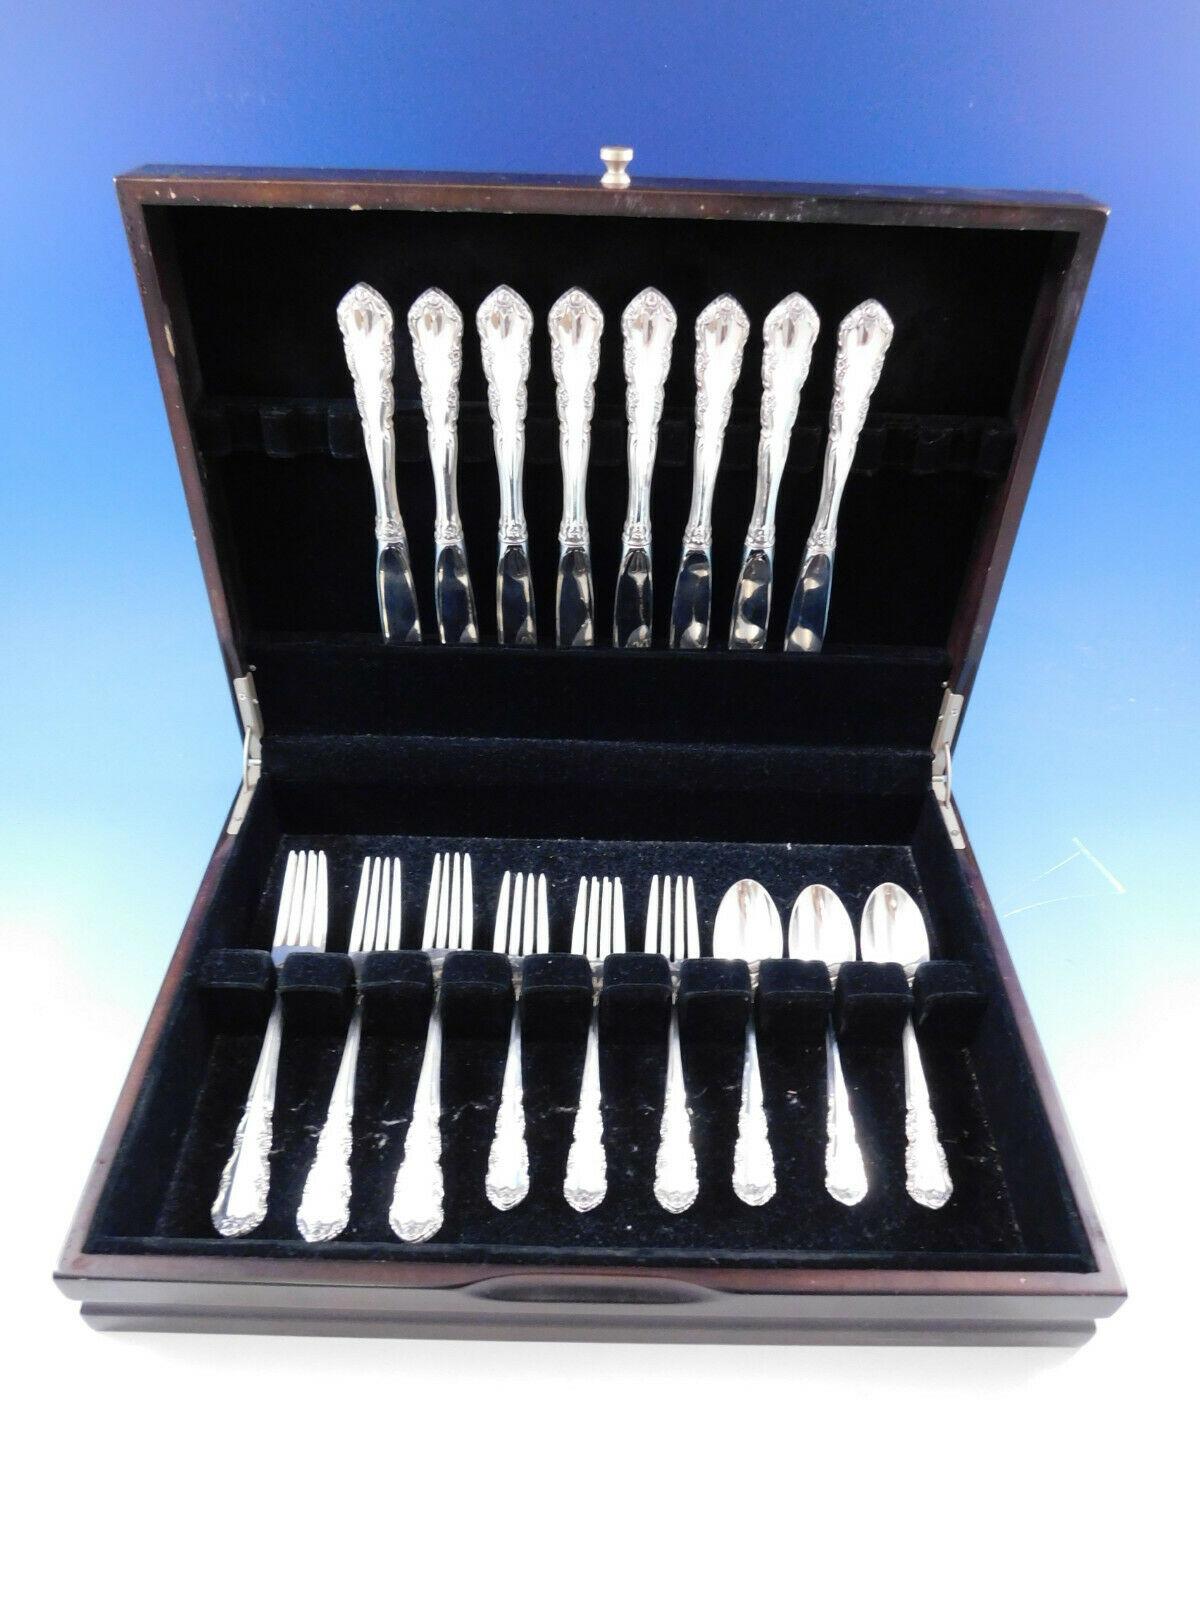 Shenandoah by Wallace sterling silver flatware set, 32 pieces. This set includes:

8 knives, 9